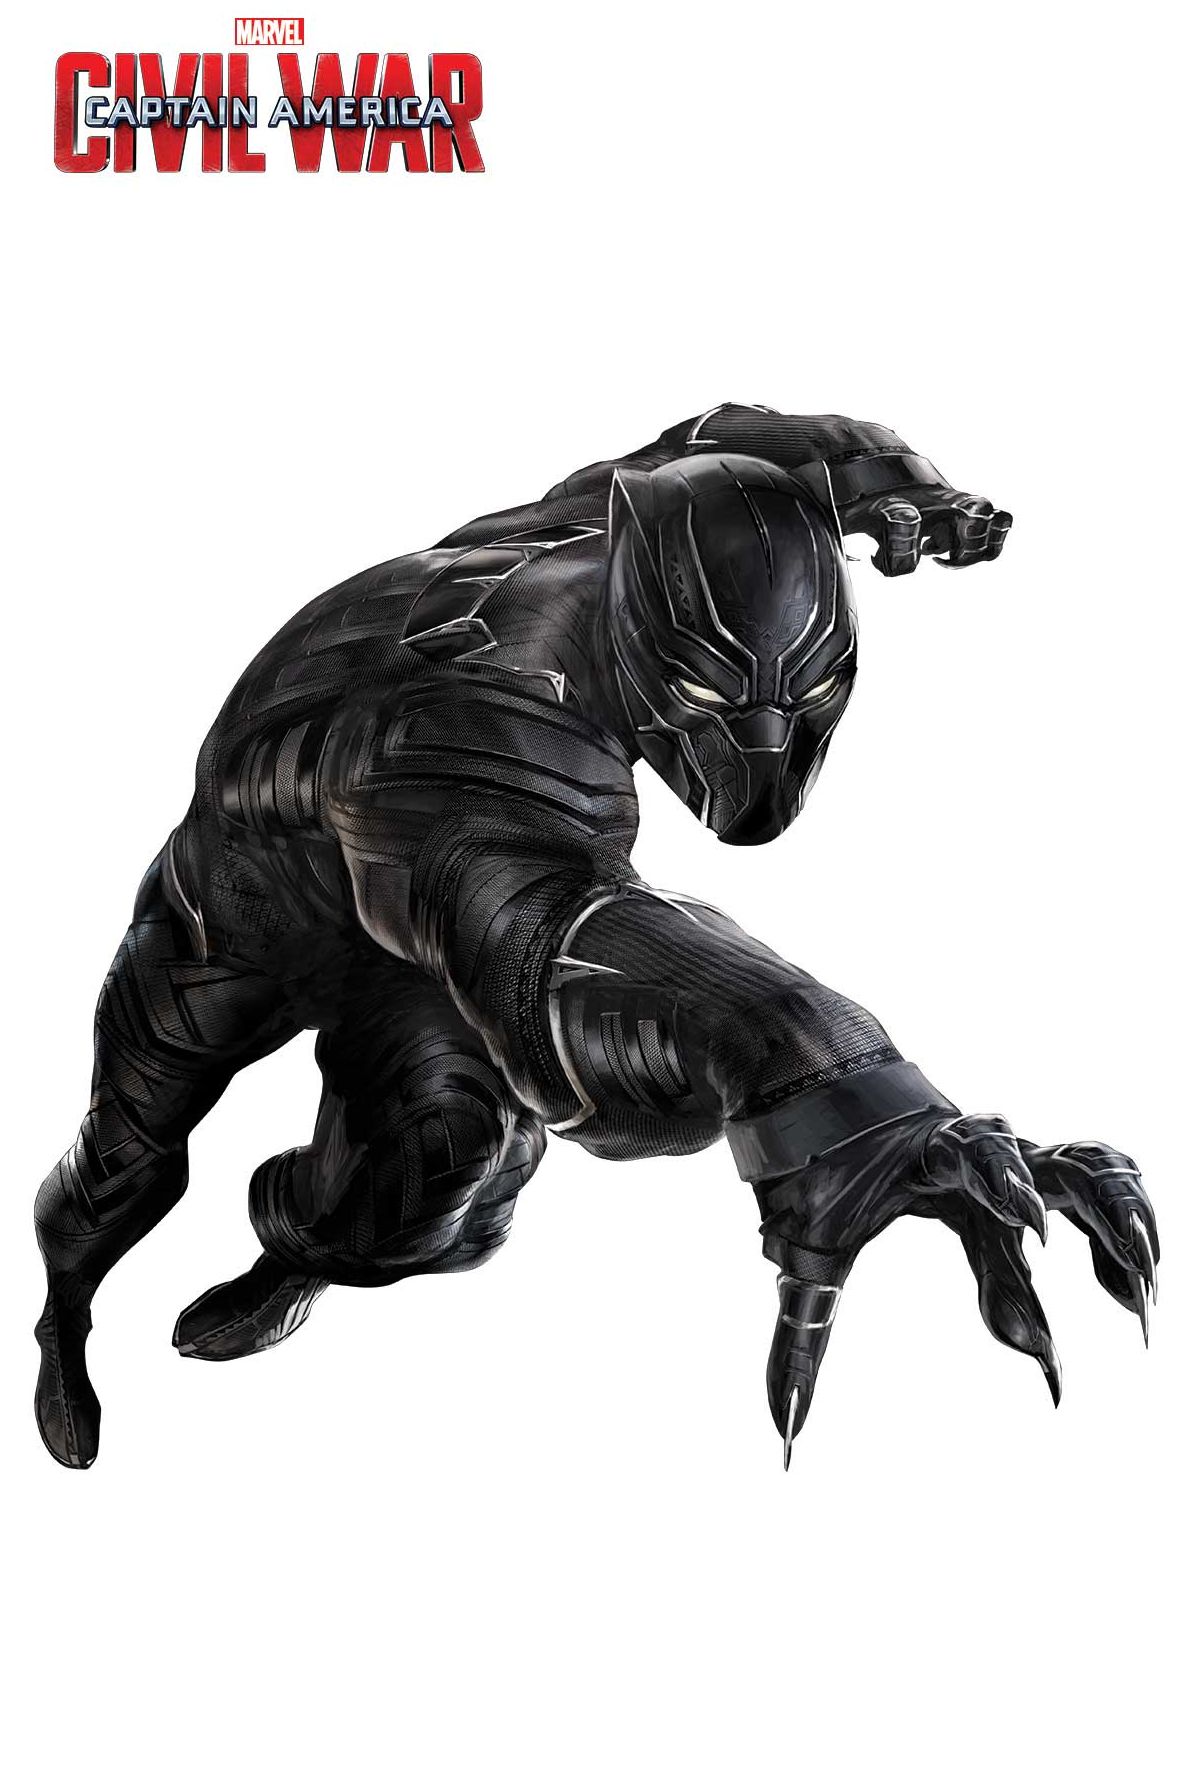 Black Panther features in new Captain America: Civil War pro